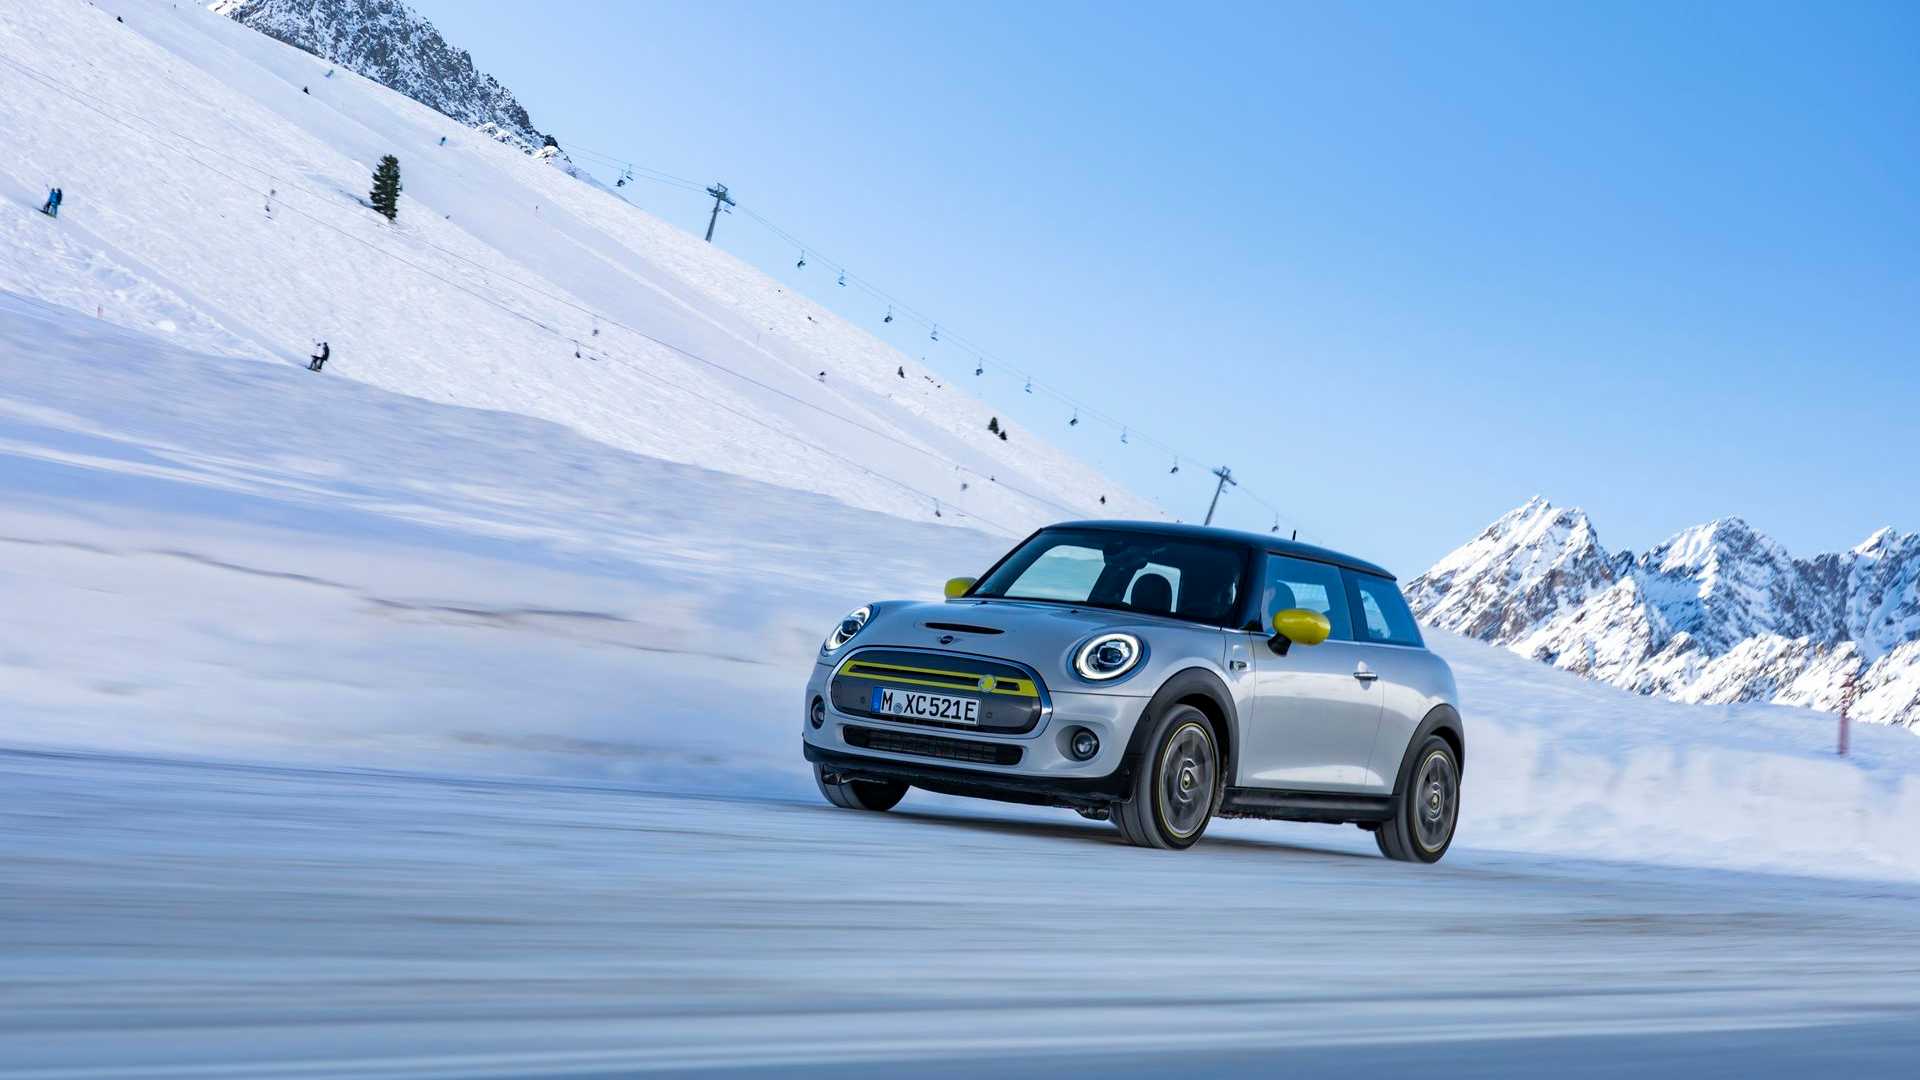 Production of MINI electric vehicles has exceeded 11,000 units, with strong performance in the European market.